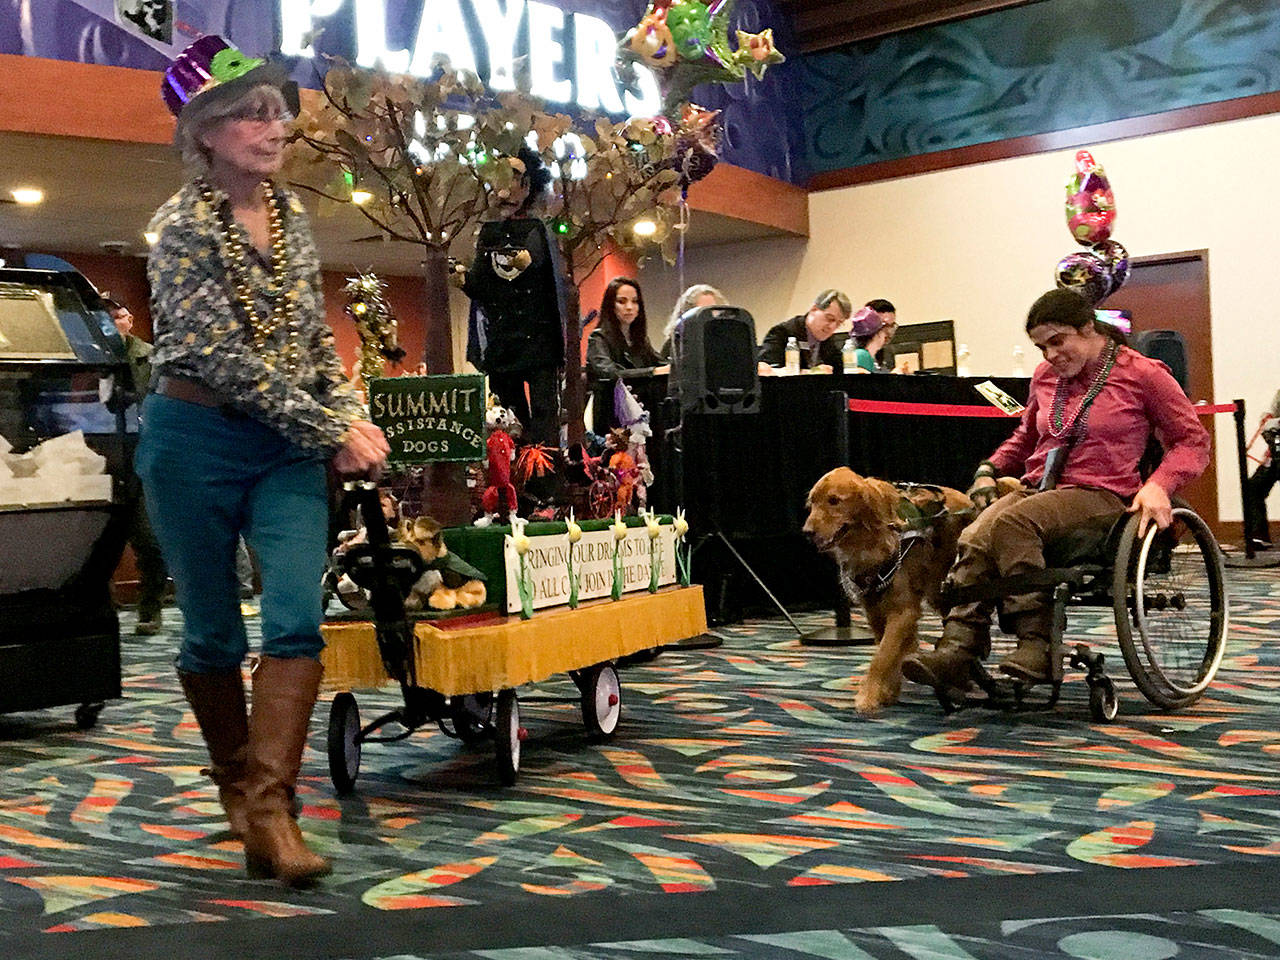 Celebrating Fat Tuesday in style: Suquamish Clearwater Casino Resort event helps local causes